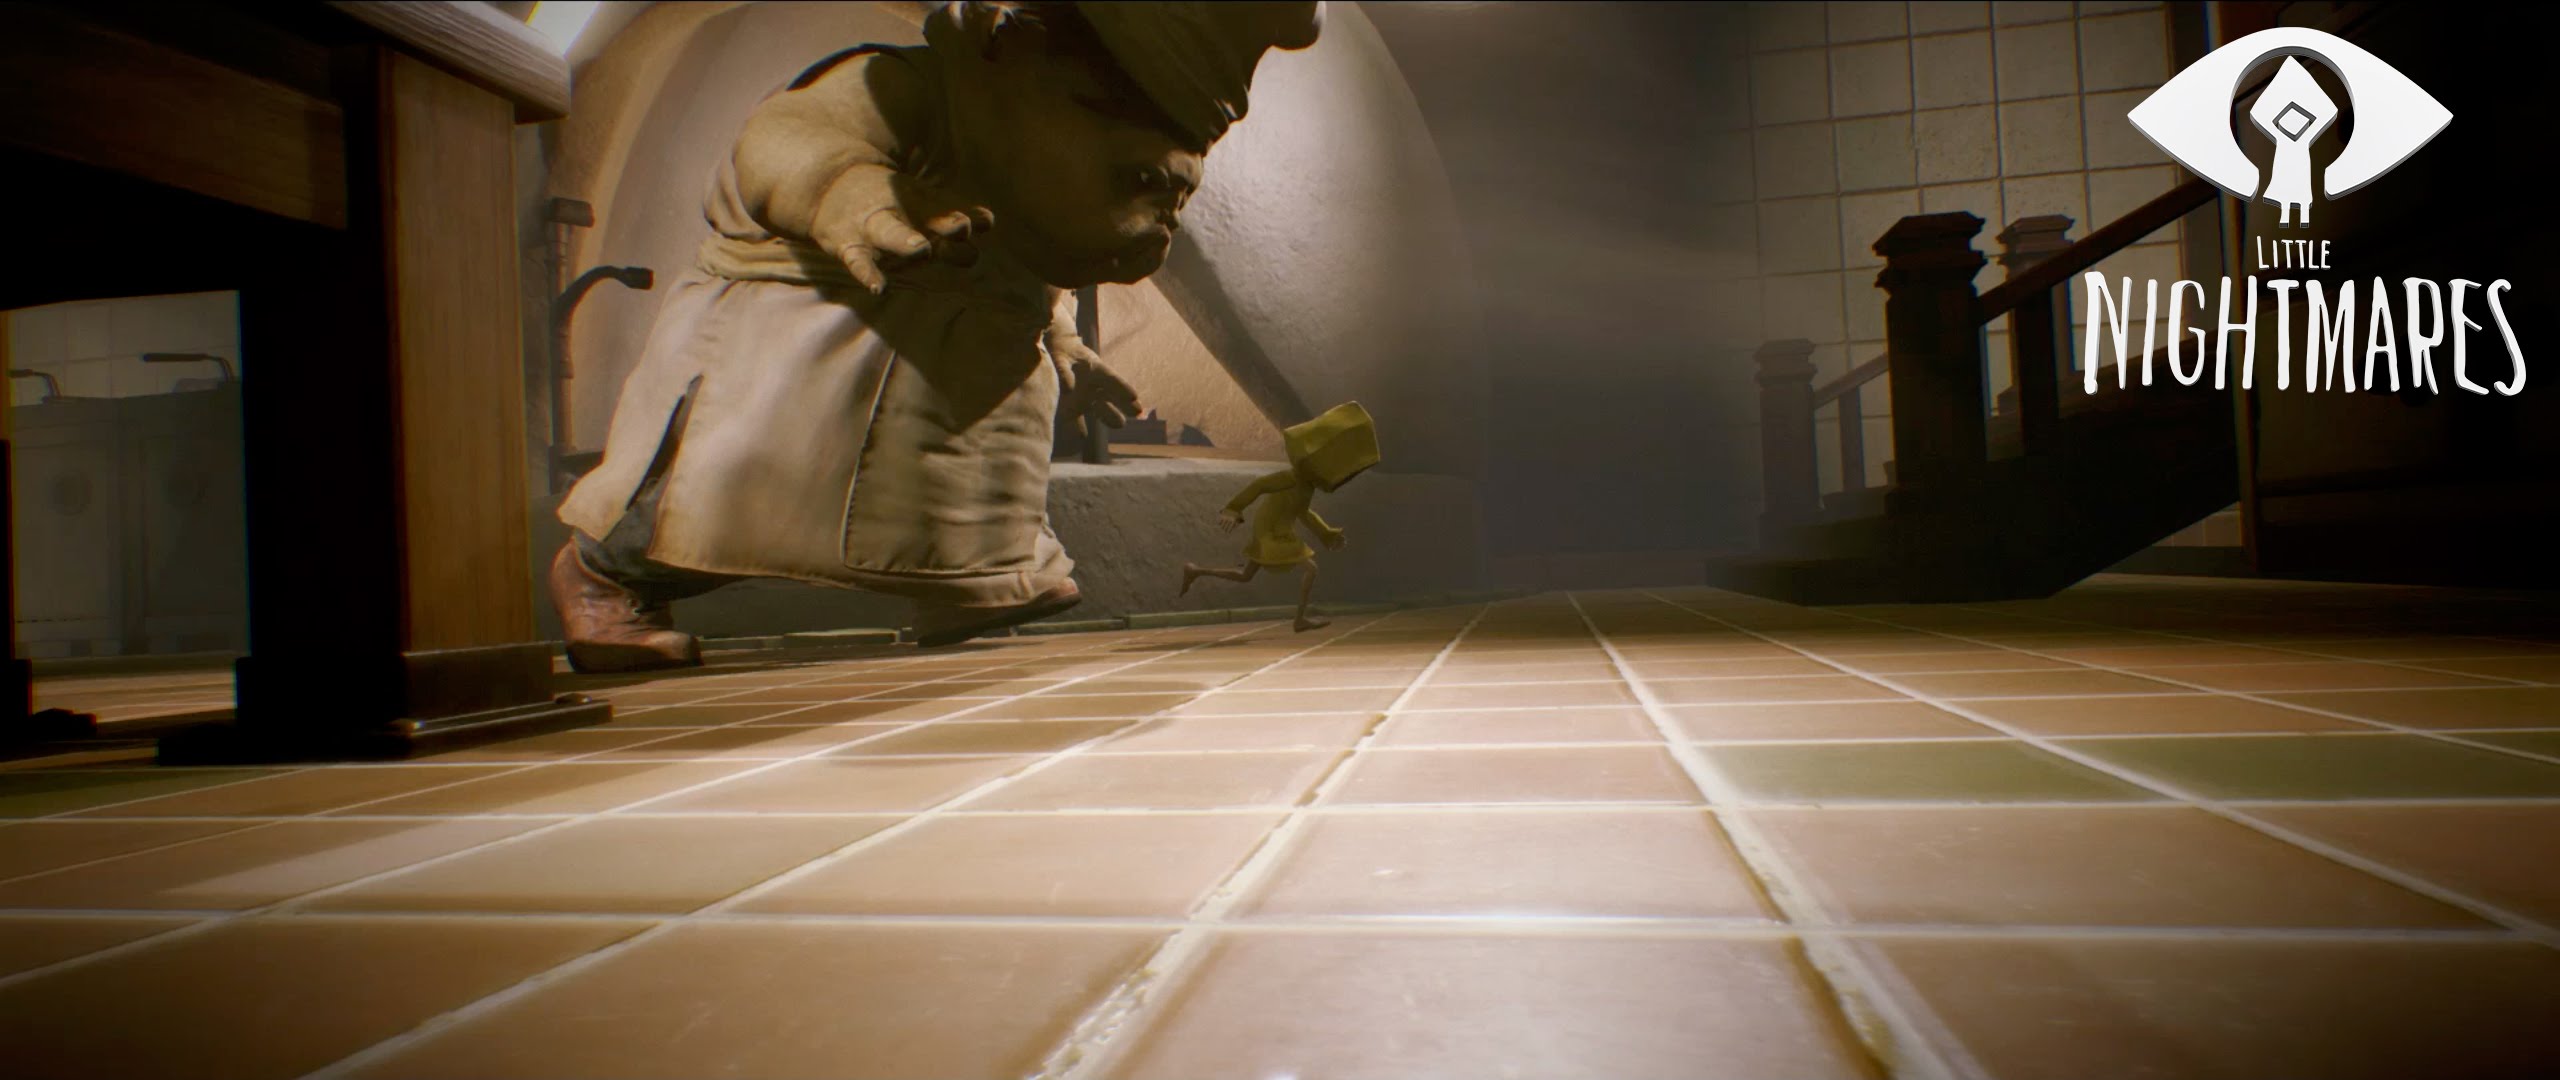 Little Nightmares Backgrounds, Compatible - PC, Mobile, Gadgets| 2560x1080 px